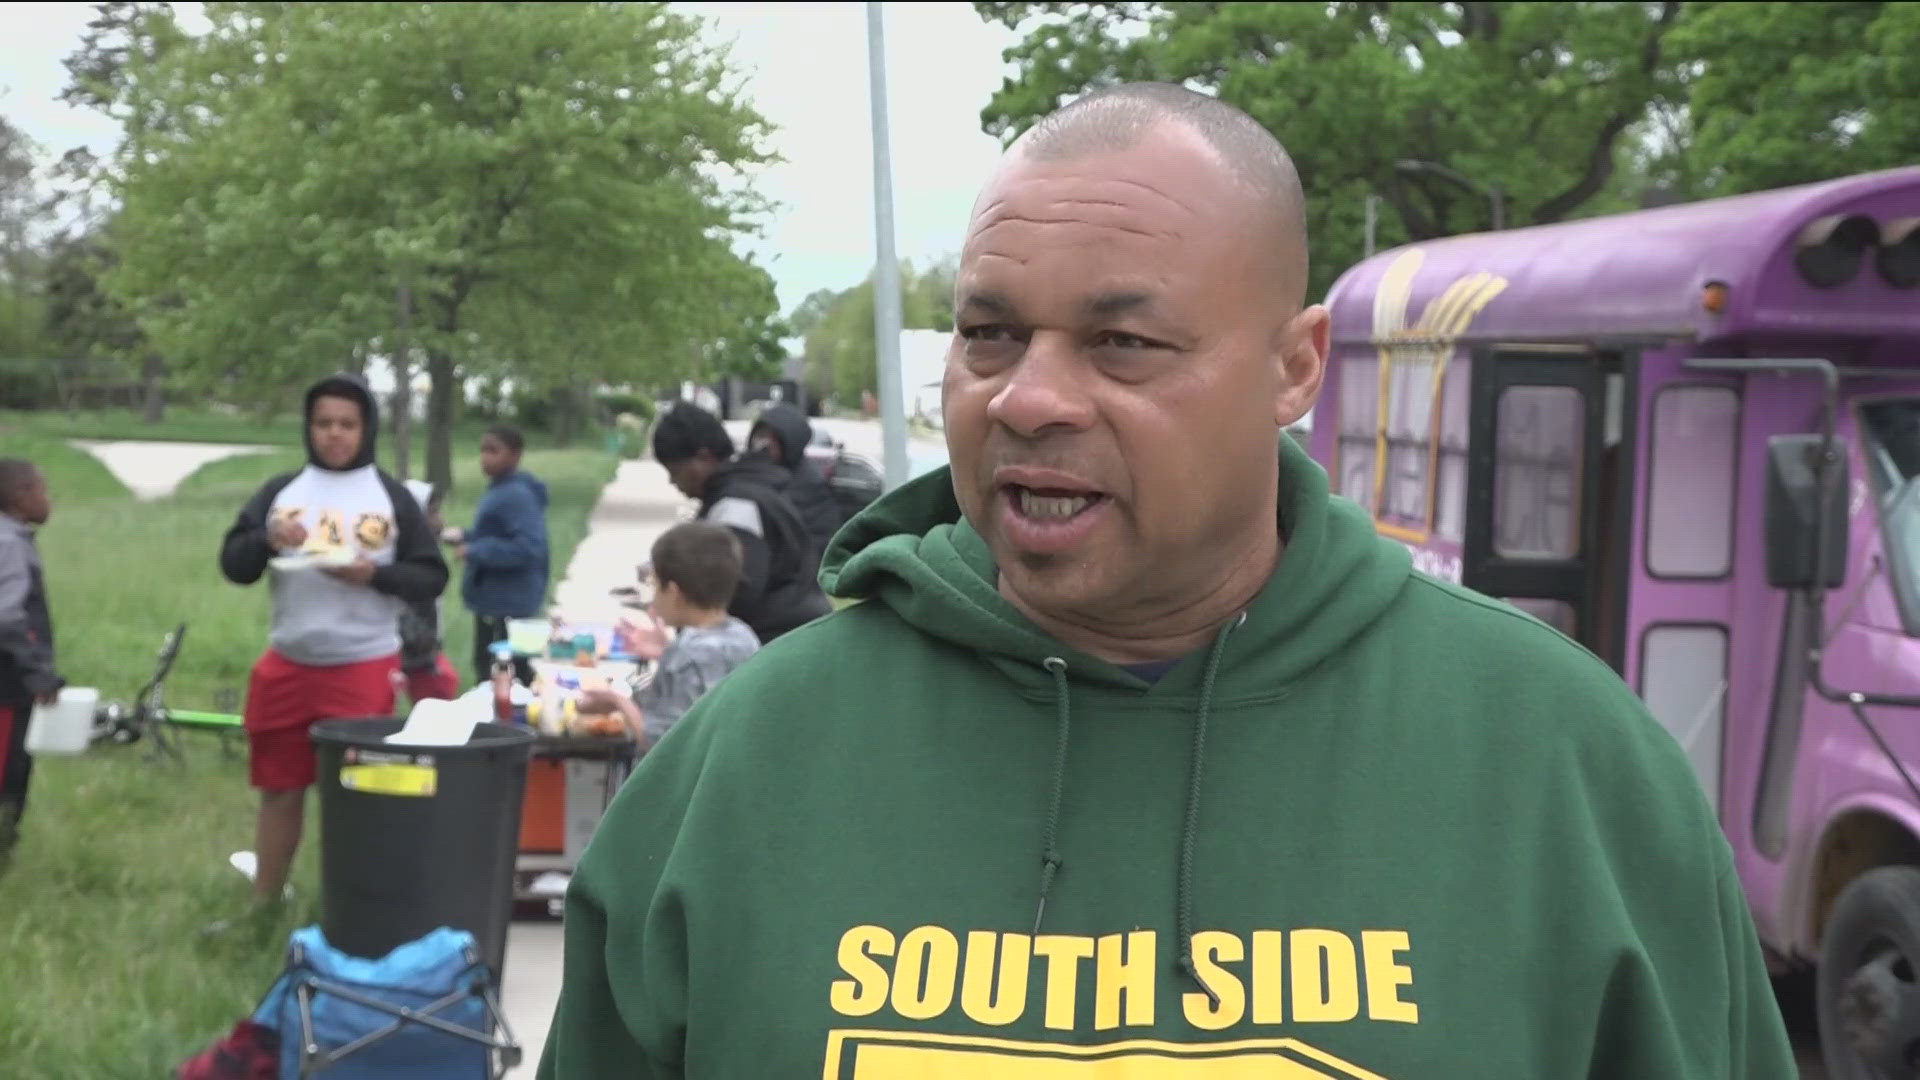 Charles Randolph teaches kids how to play football through the Toledo South Side Packers. But when he saw kids hungry at practice, he decided to go above and beyond.